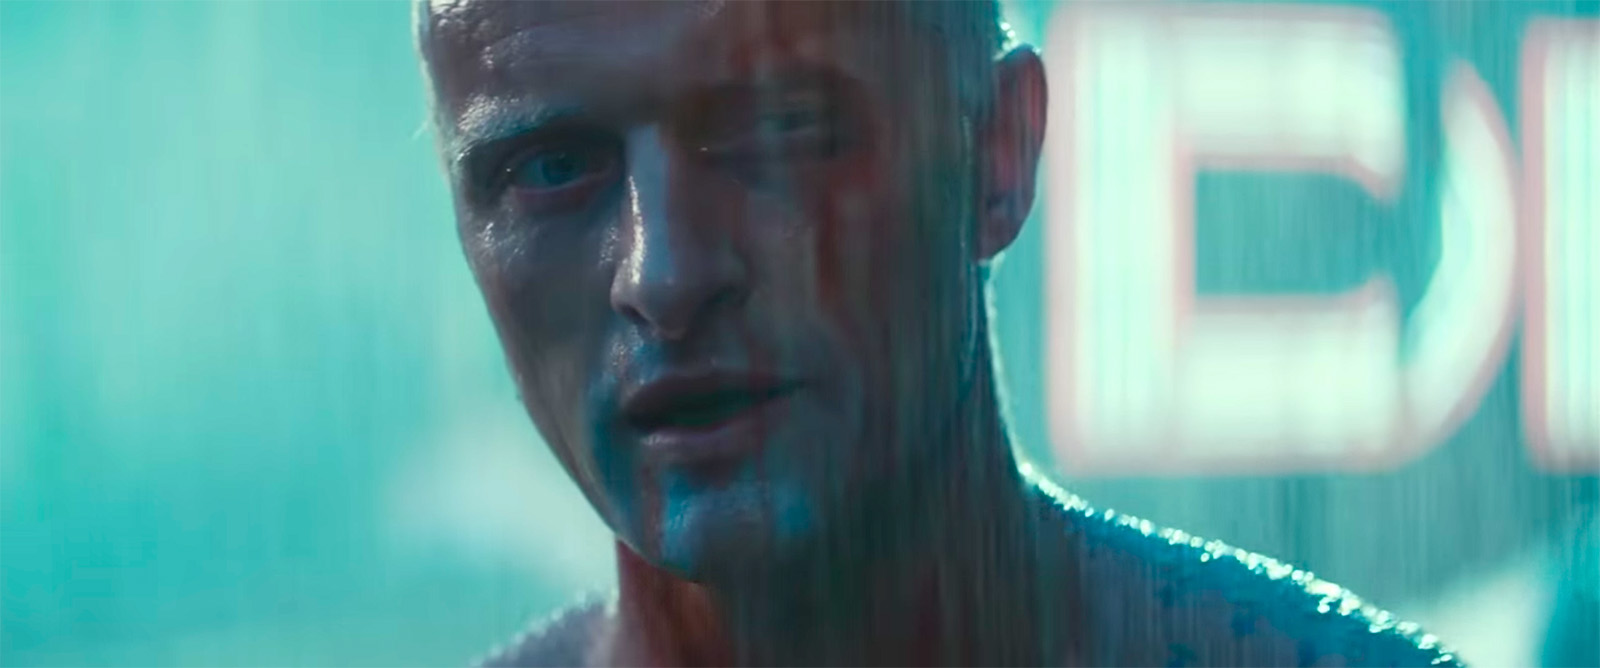 Tears in the rain: Blade Runner's lifelike android quarry, Roy Batty